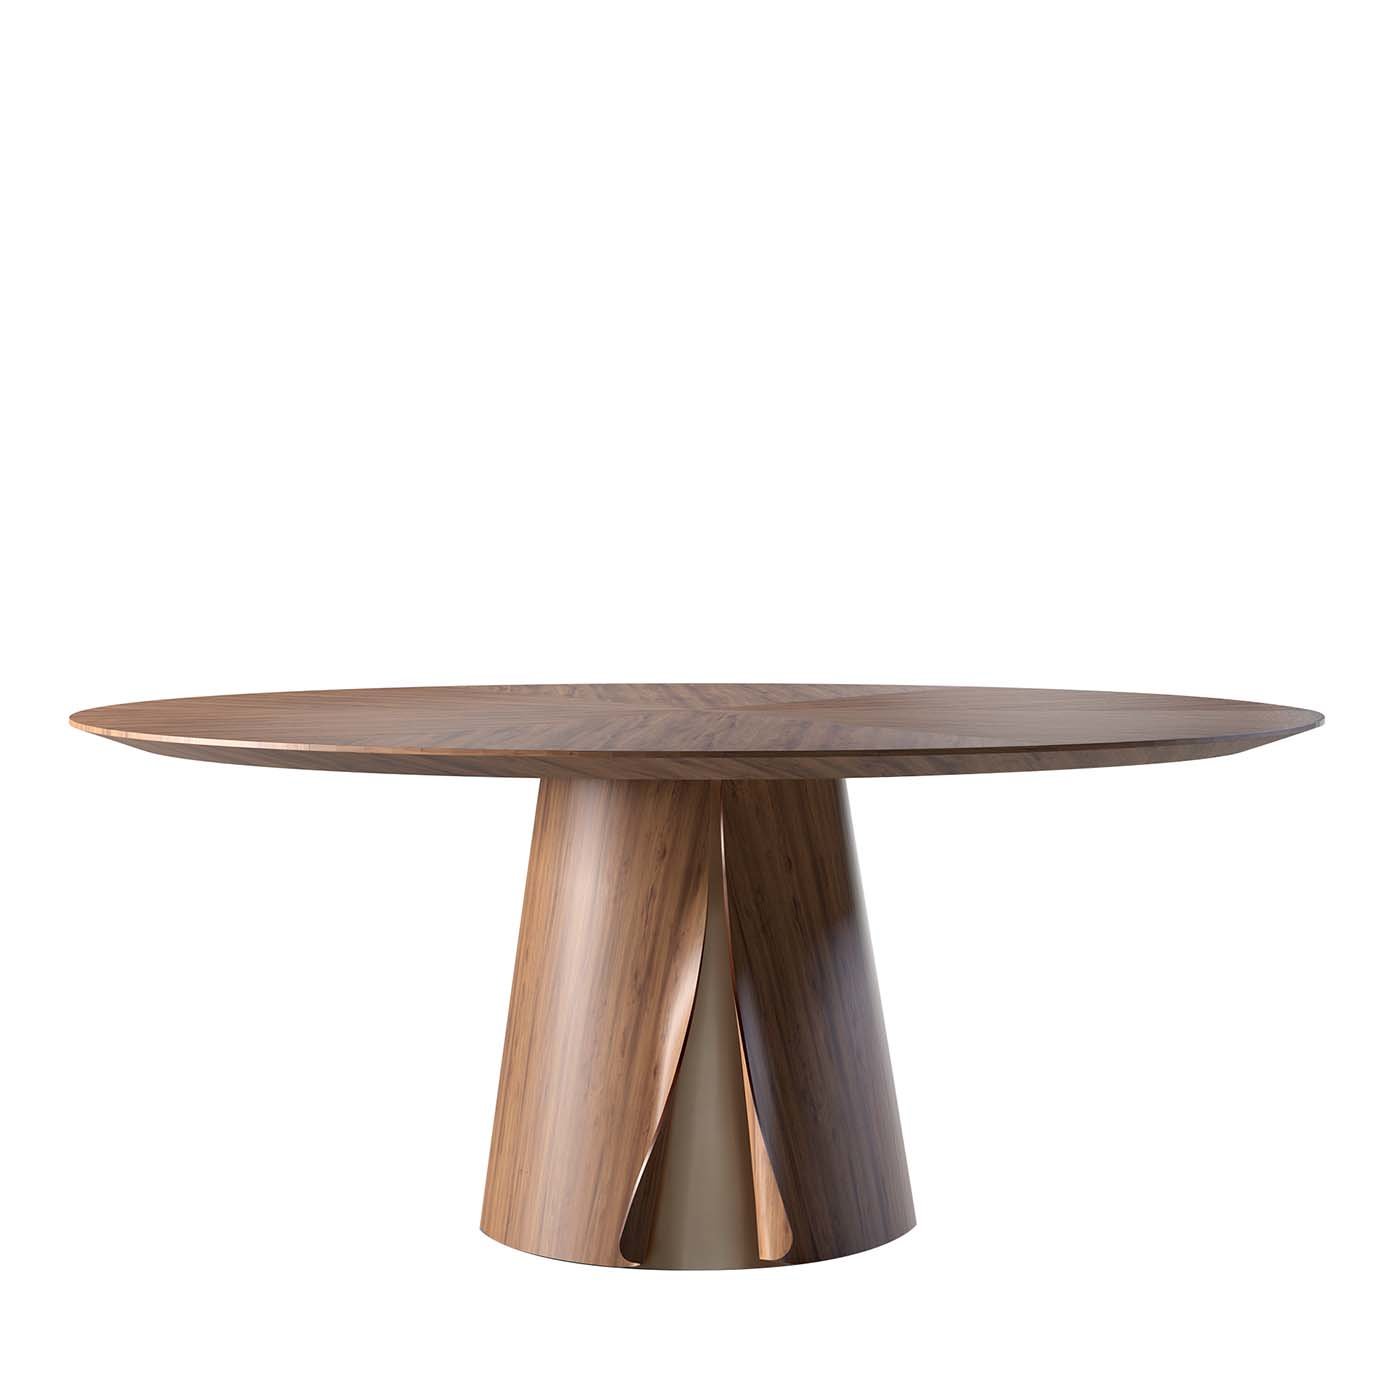 Shell Round Dining Table by Norberto Delfinetti - Main view